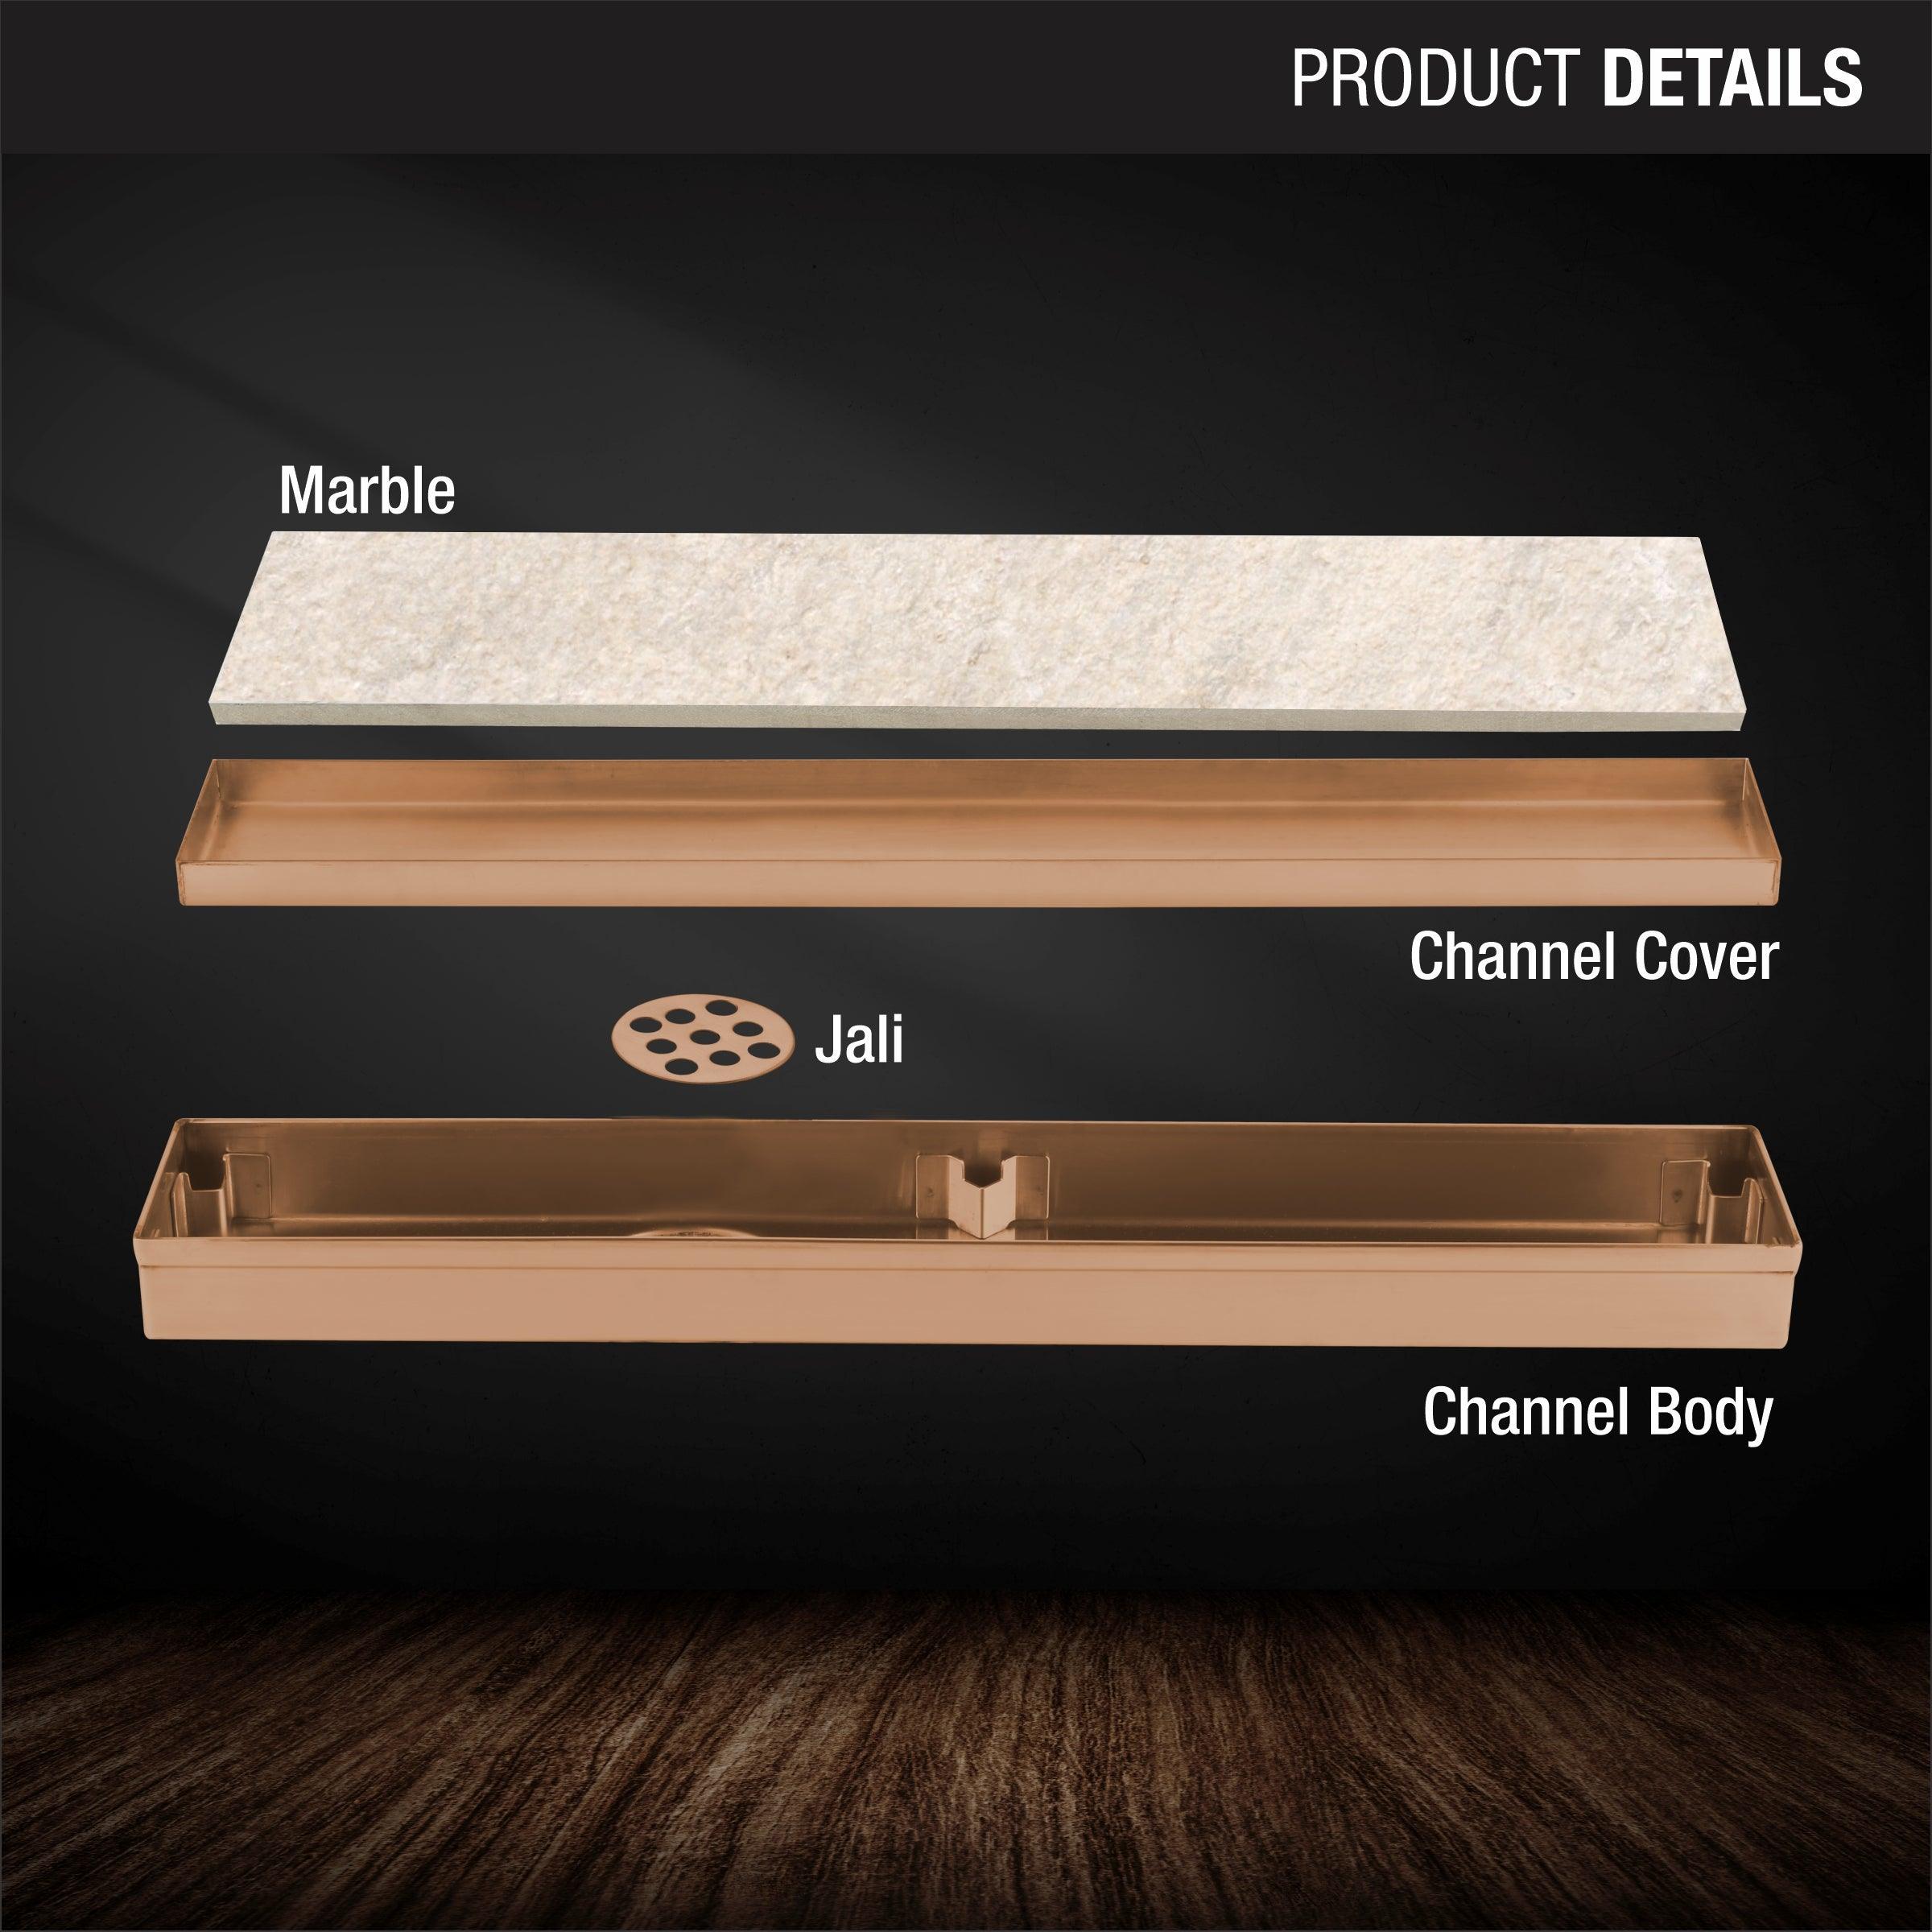 Marble Insert Shower Drain Channel - Antique Copper (40 x 2 Inches) product details